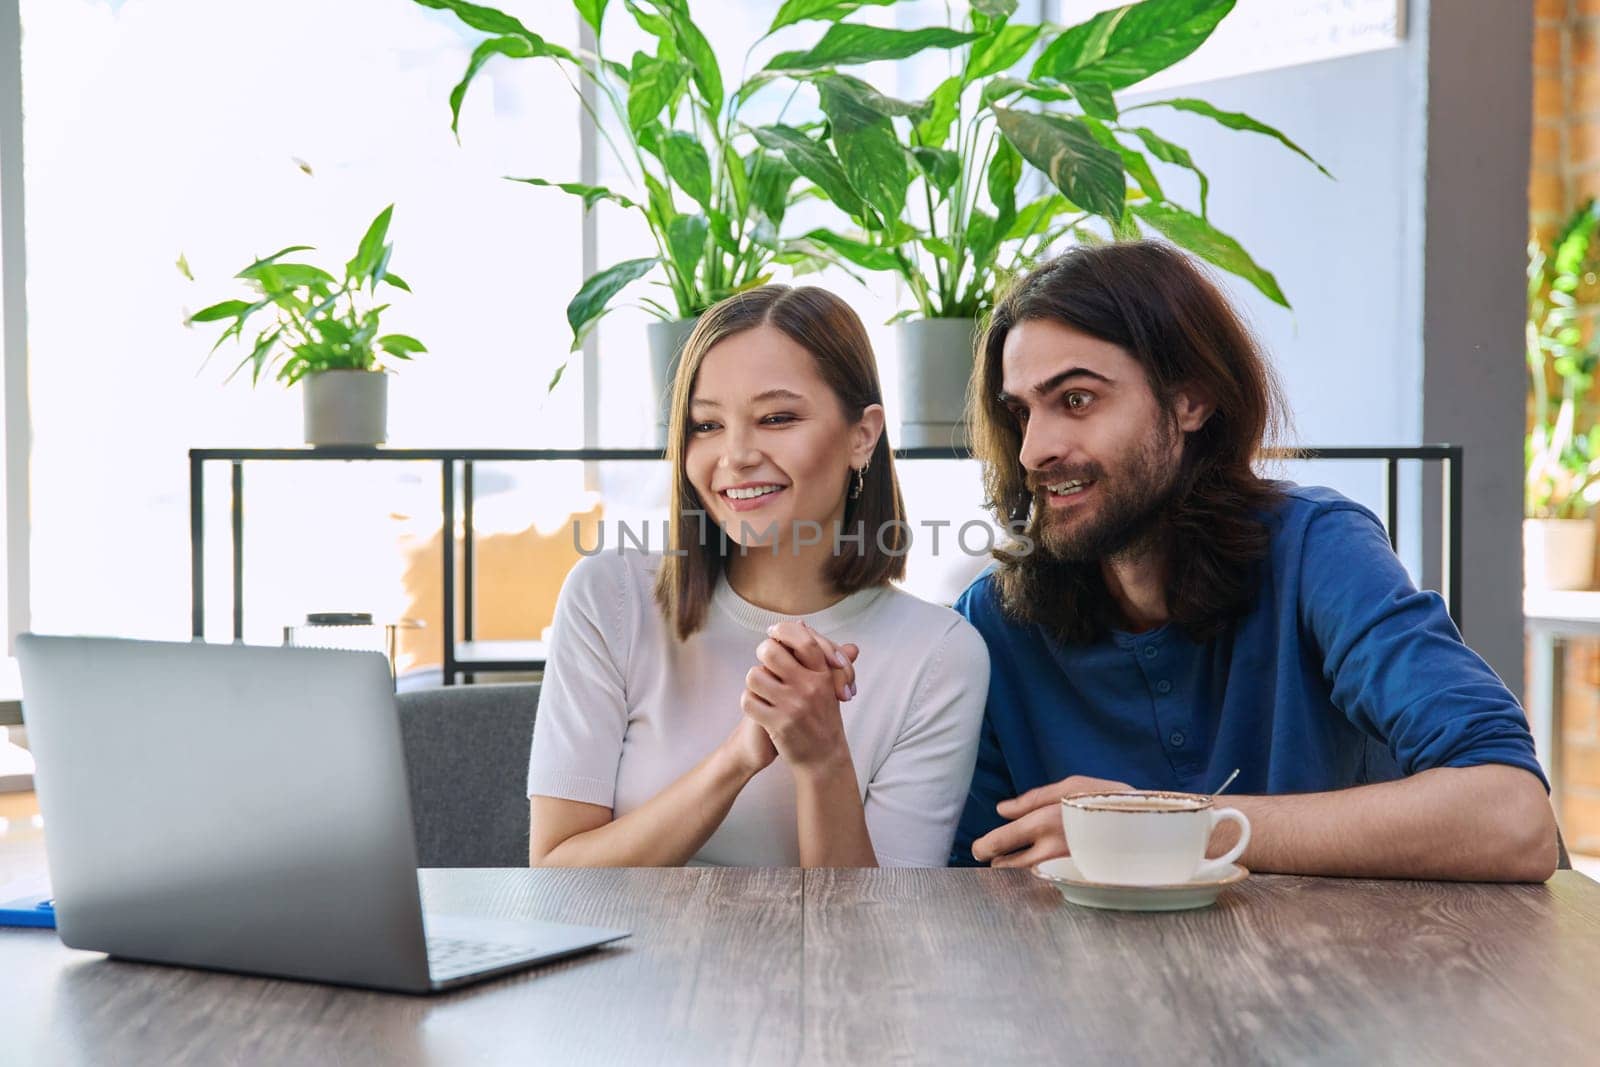 Happy smiling surprised young couple looking at laptop together while sitting in cafe, cafeteria. Leisure time for two, lifestyle, togetherness, relationship, communication, work study remotely